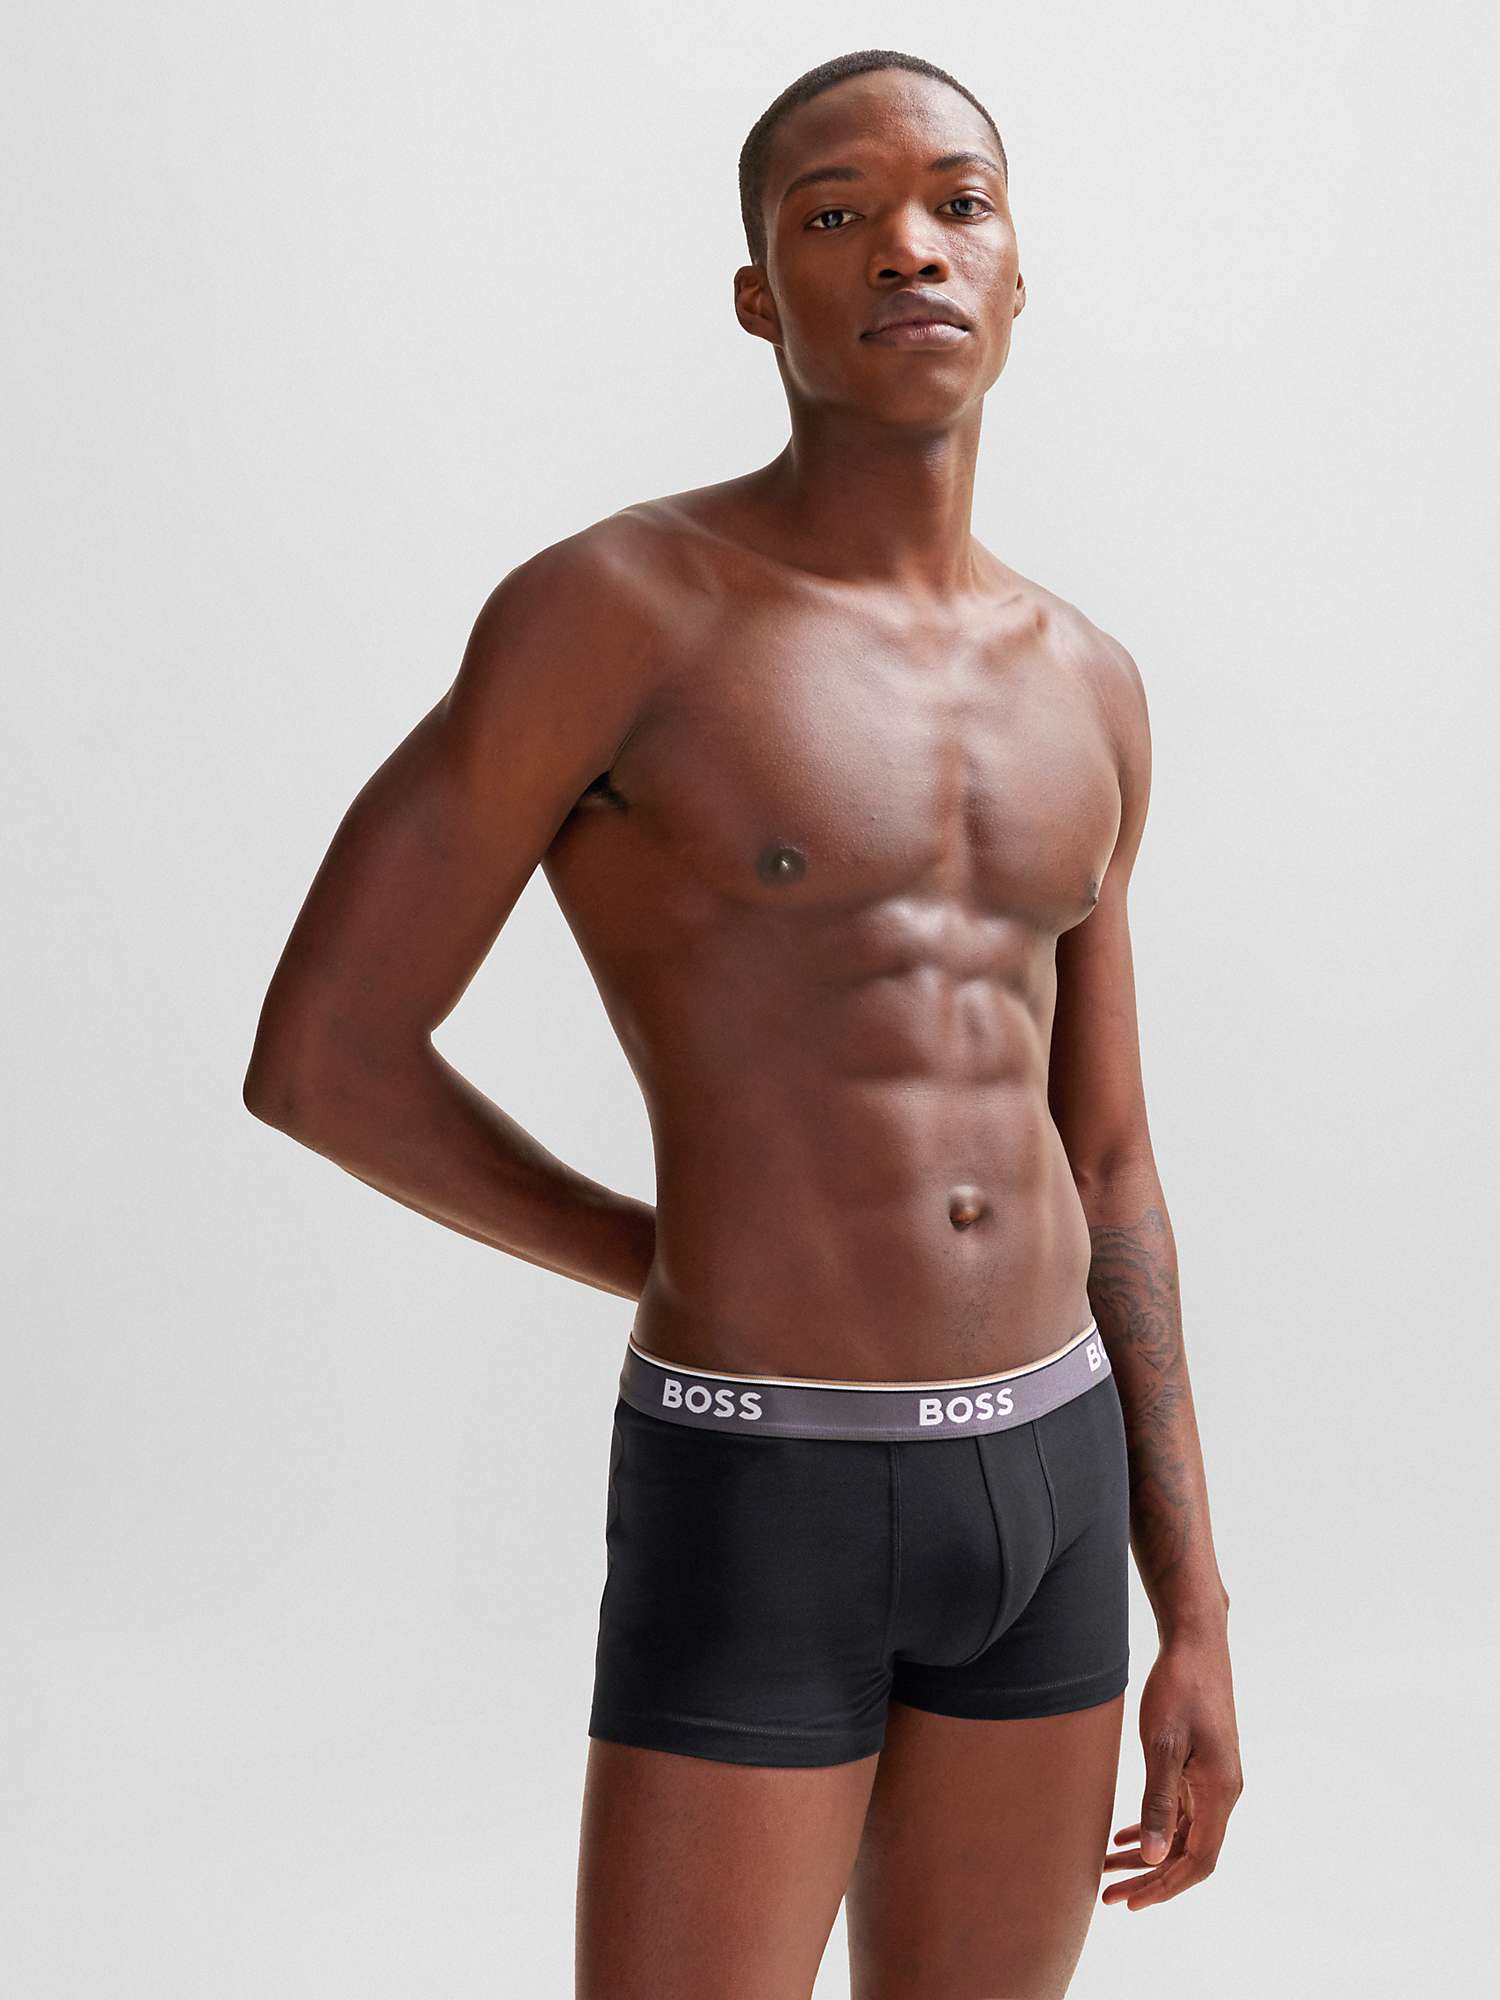 Buy BOSS Essential Style Trunks, Pack of 3, Black Online at johnlewis.com